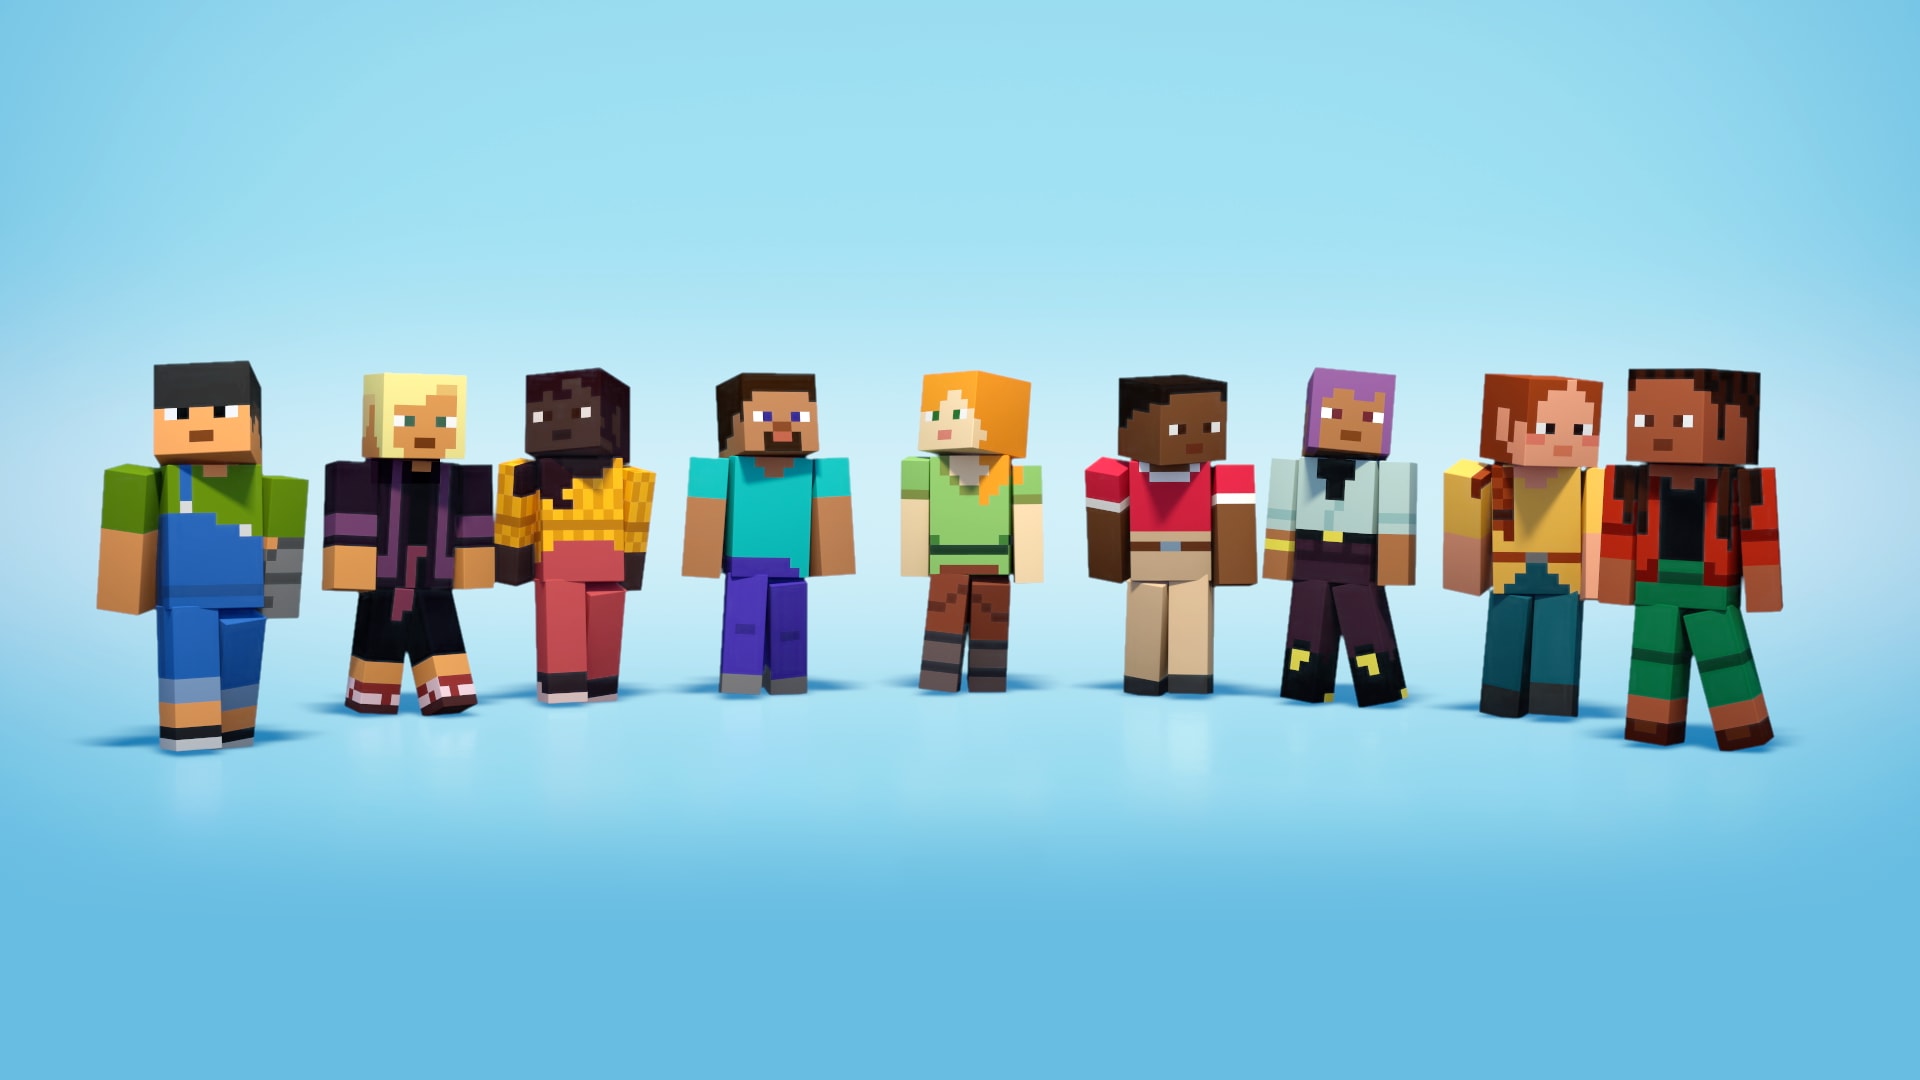 Nine player characters stand in a line. Their clothing, skin tones, hair color, and hair styles are all different.